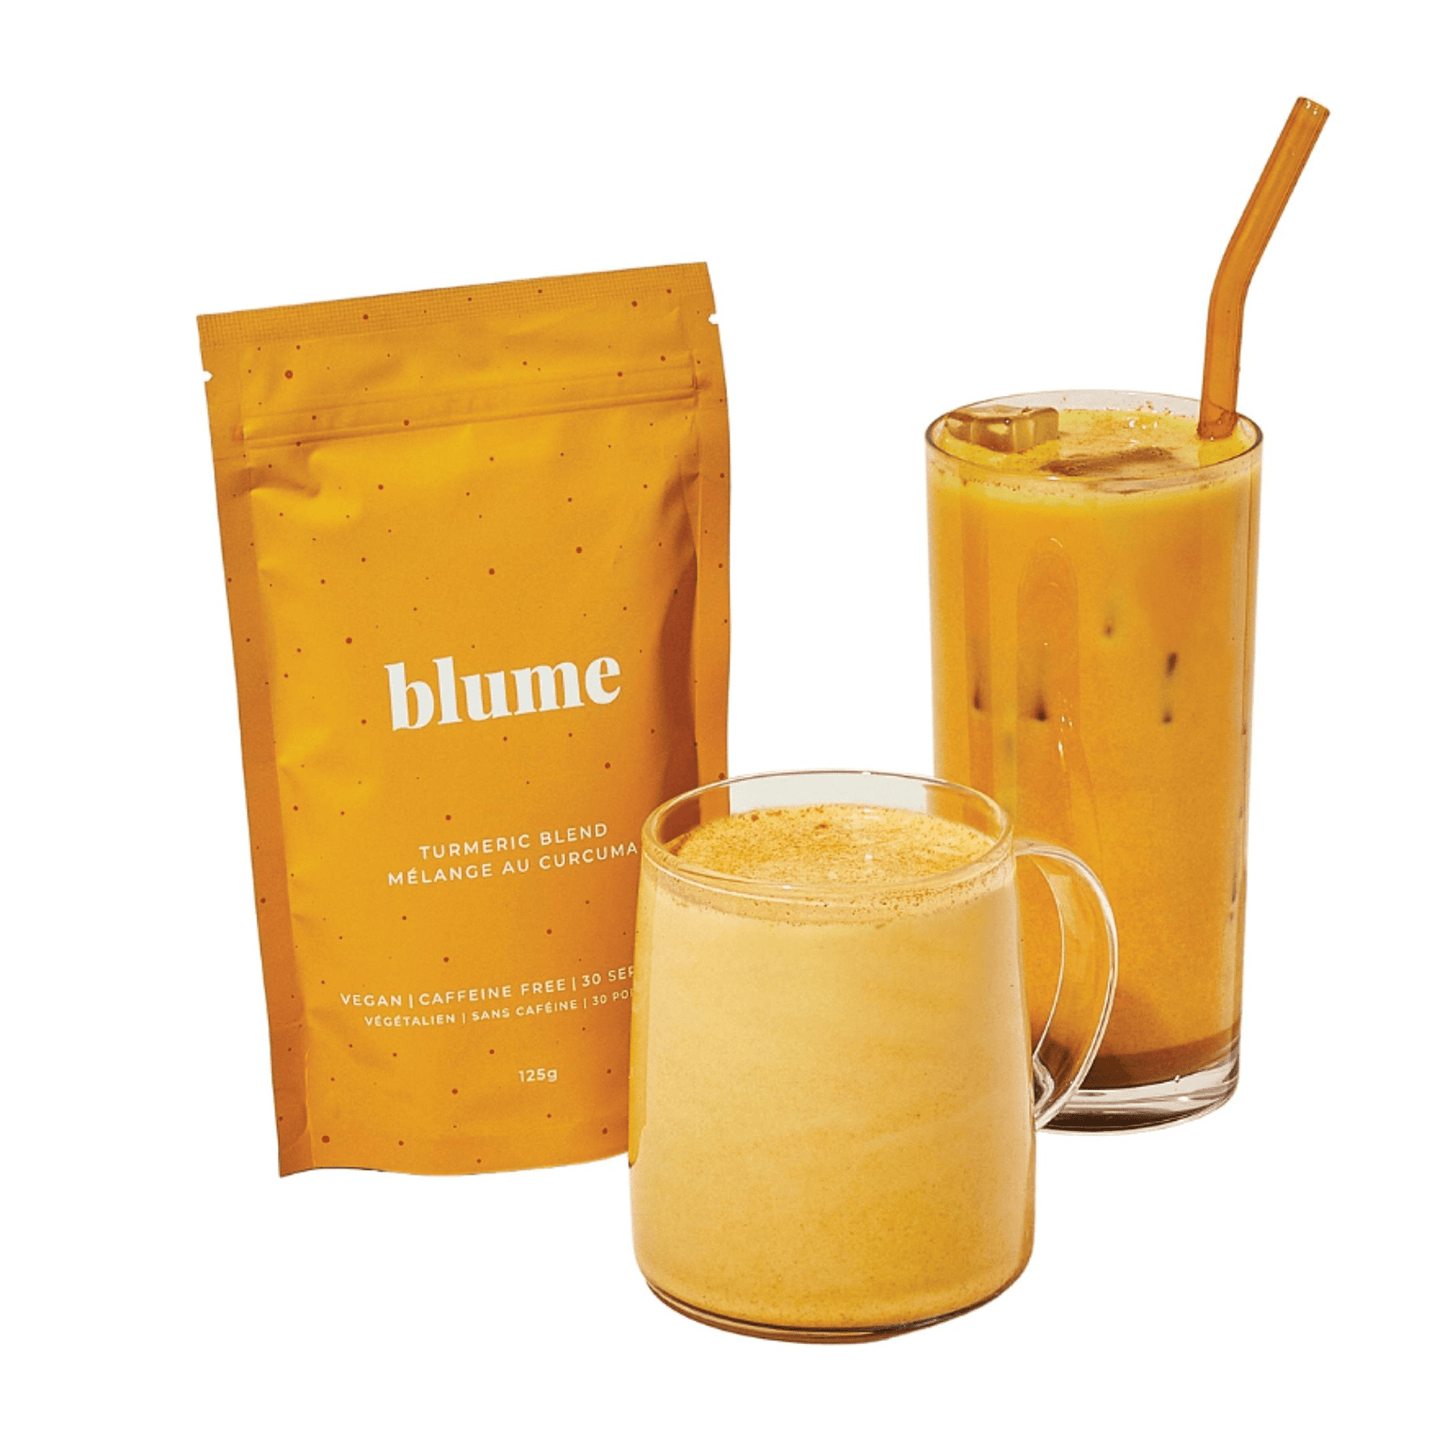 blume turmeric latte blend bag next to a small and large glass filled with smoothie